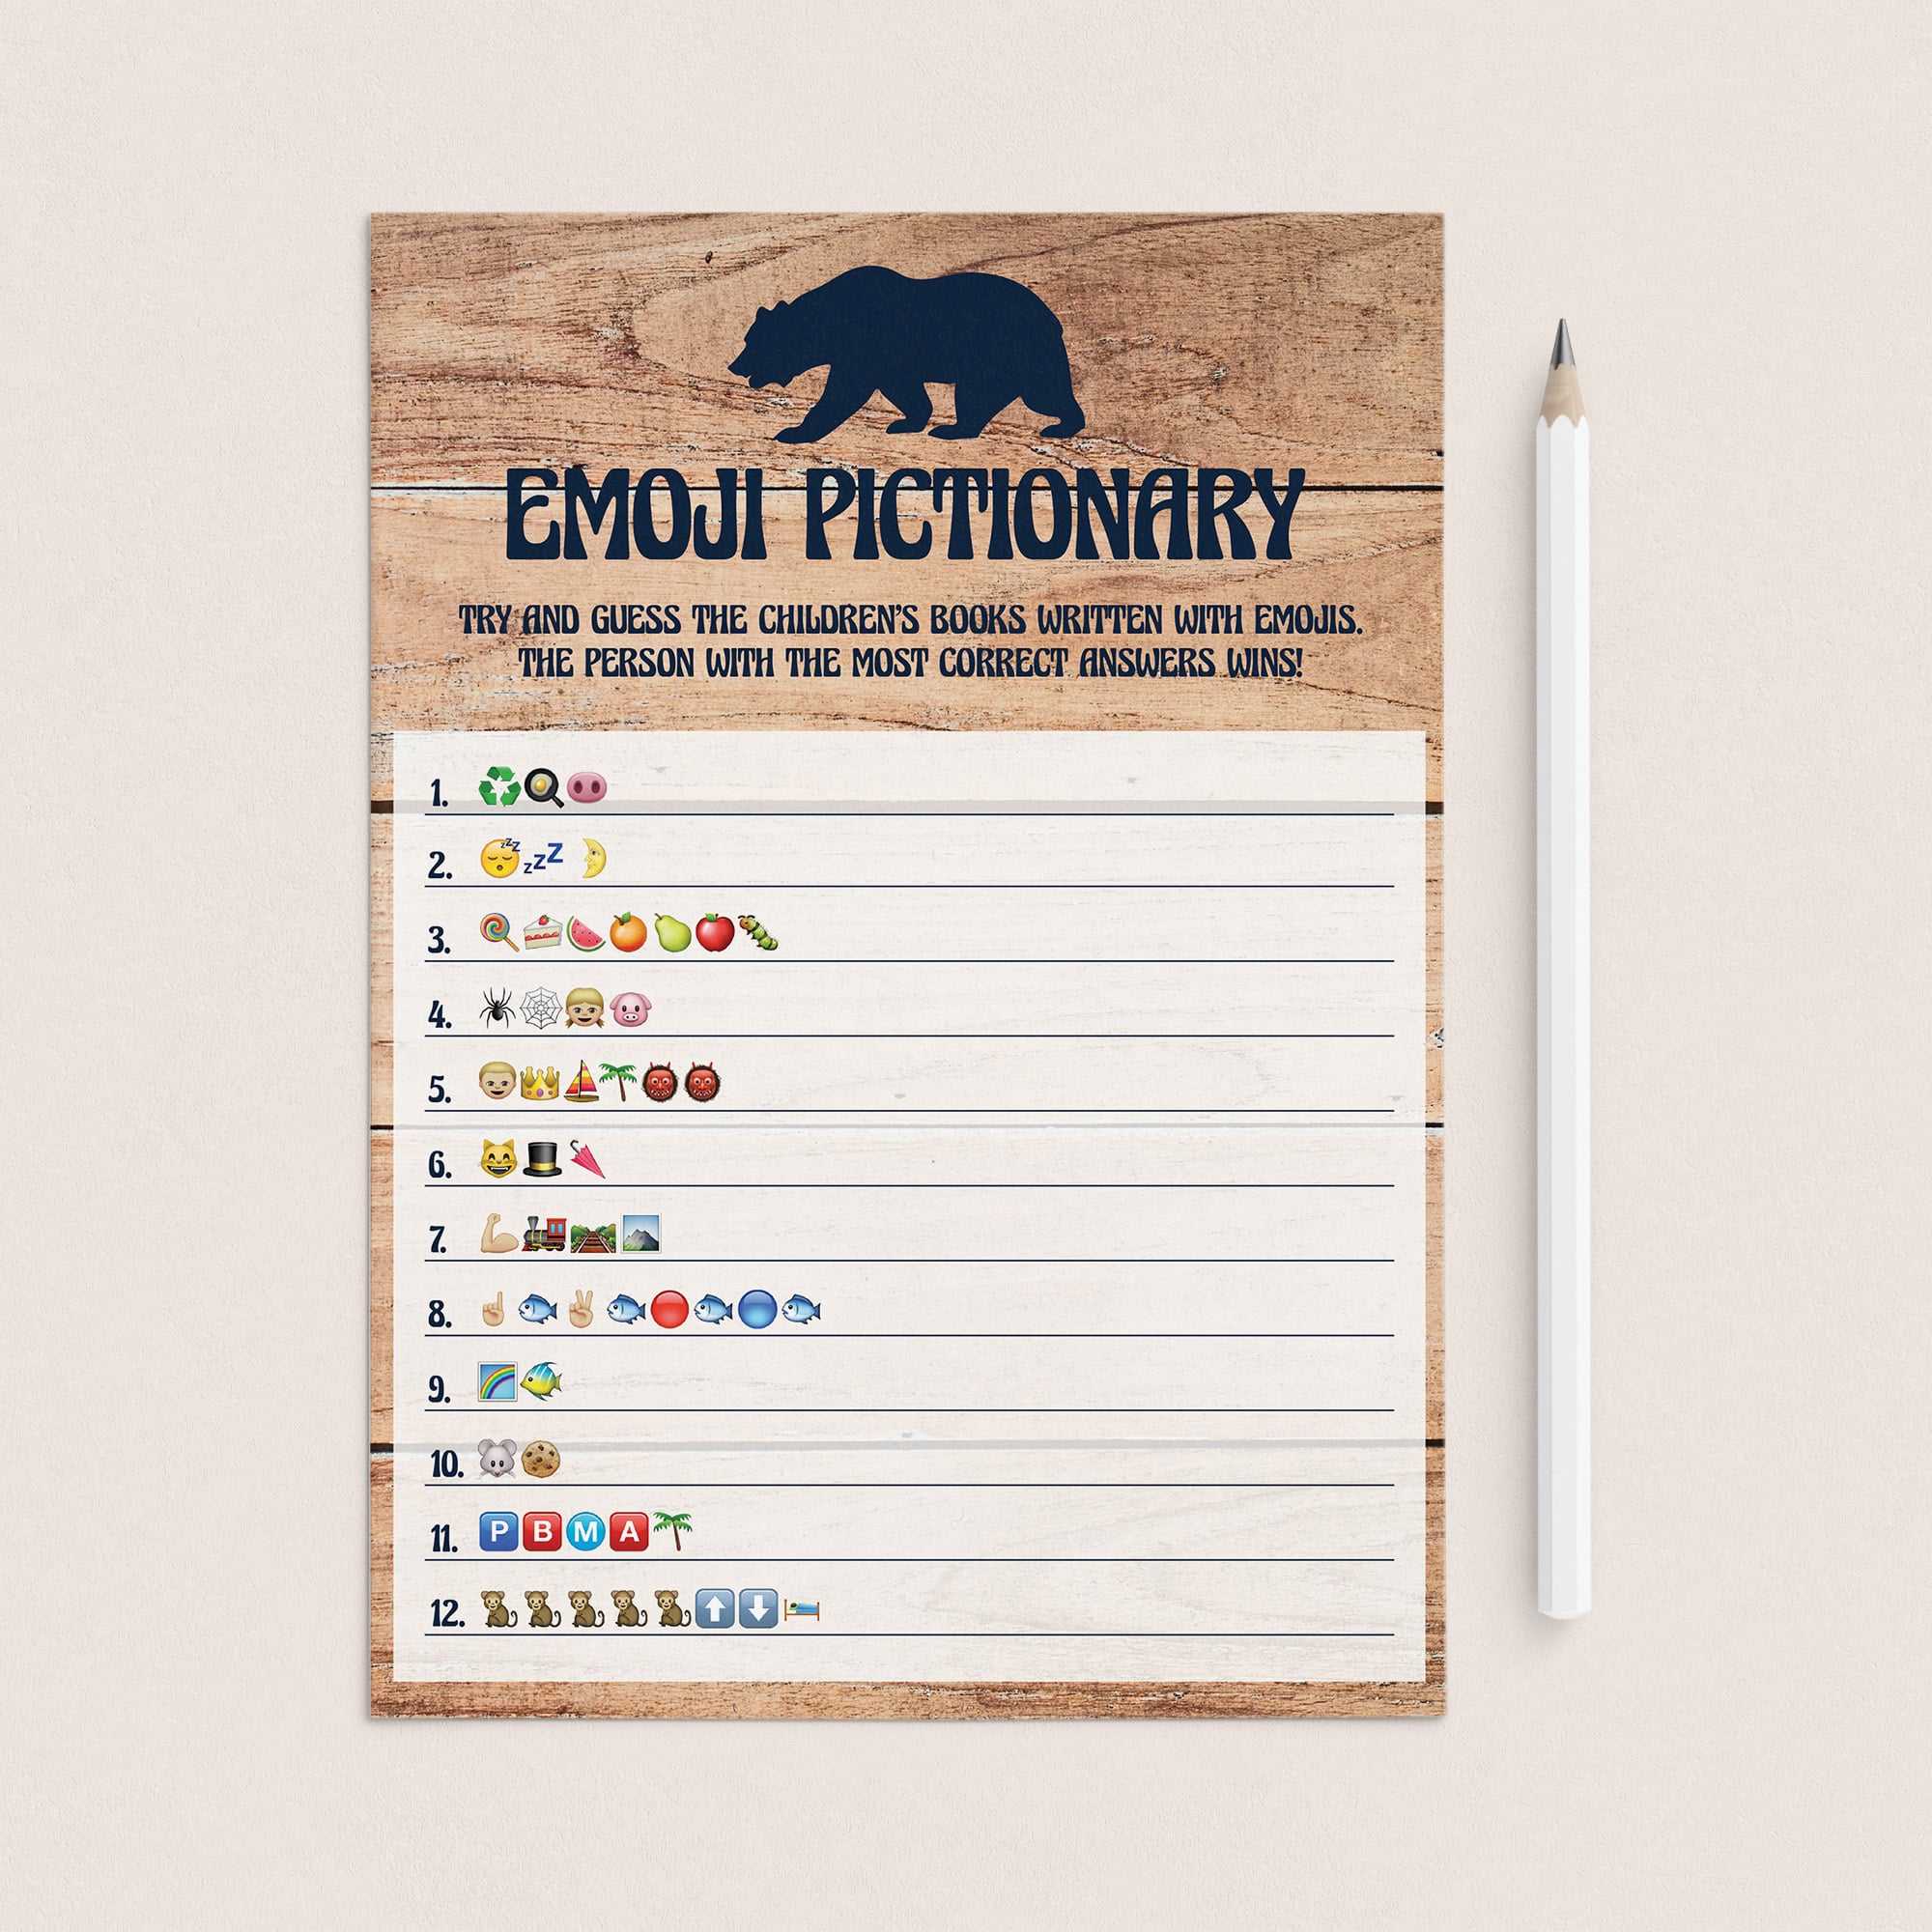 Emoji pictionary answers for baby shower by LittleSizzle